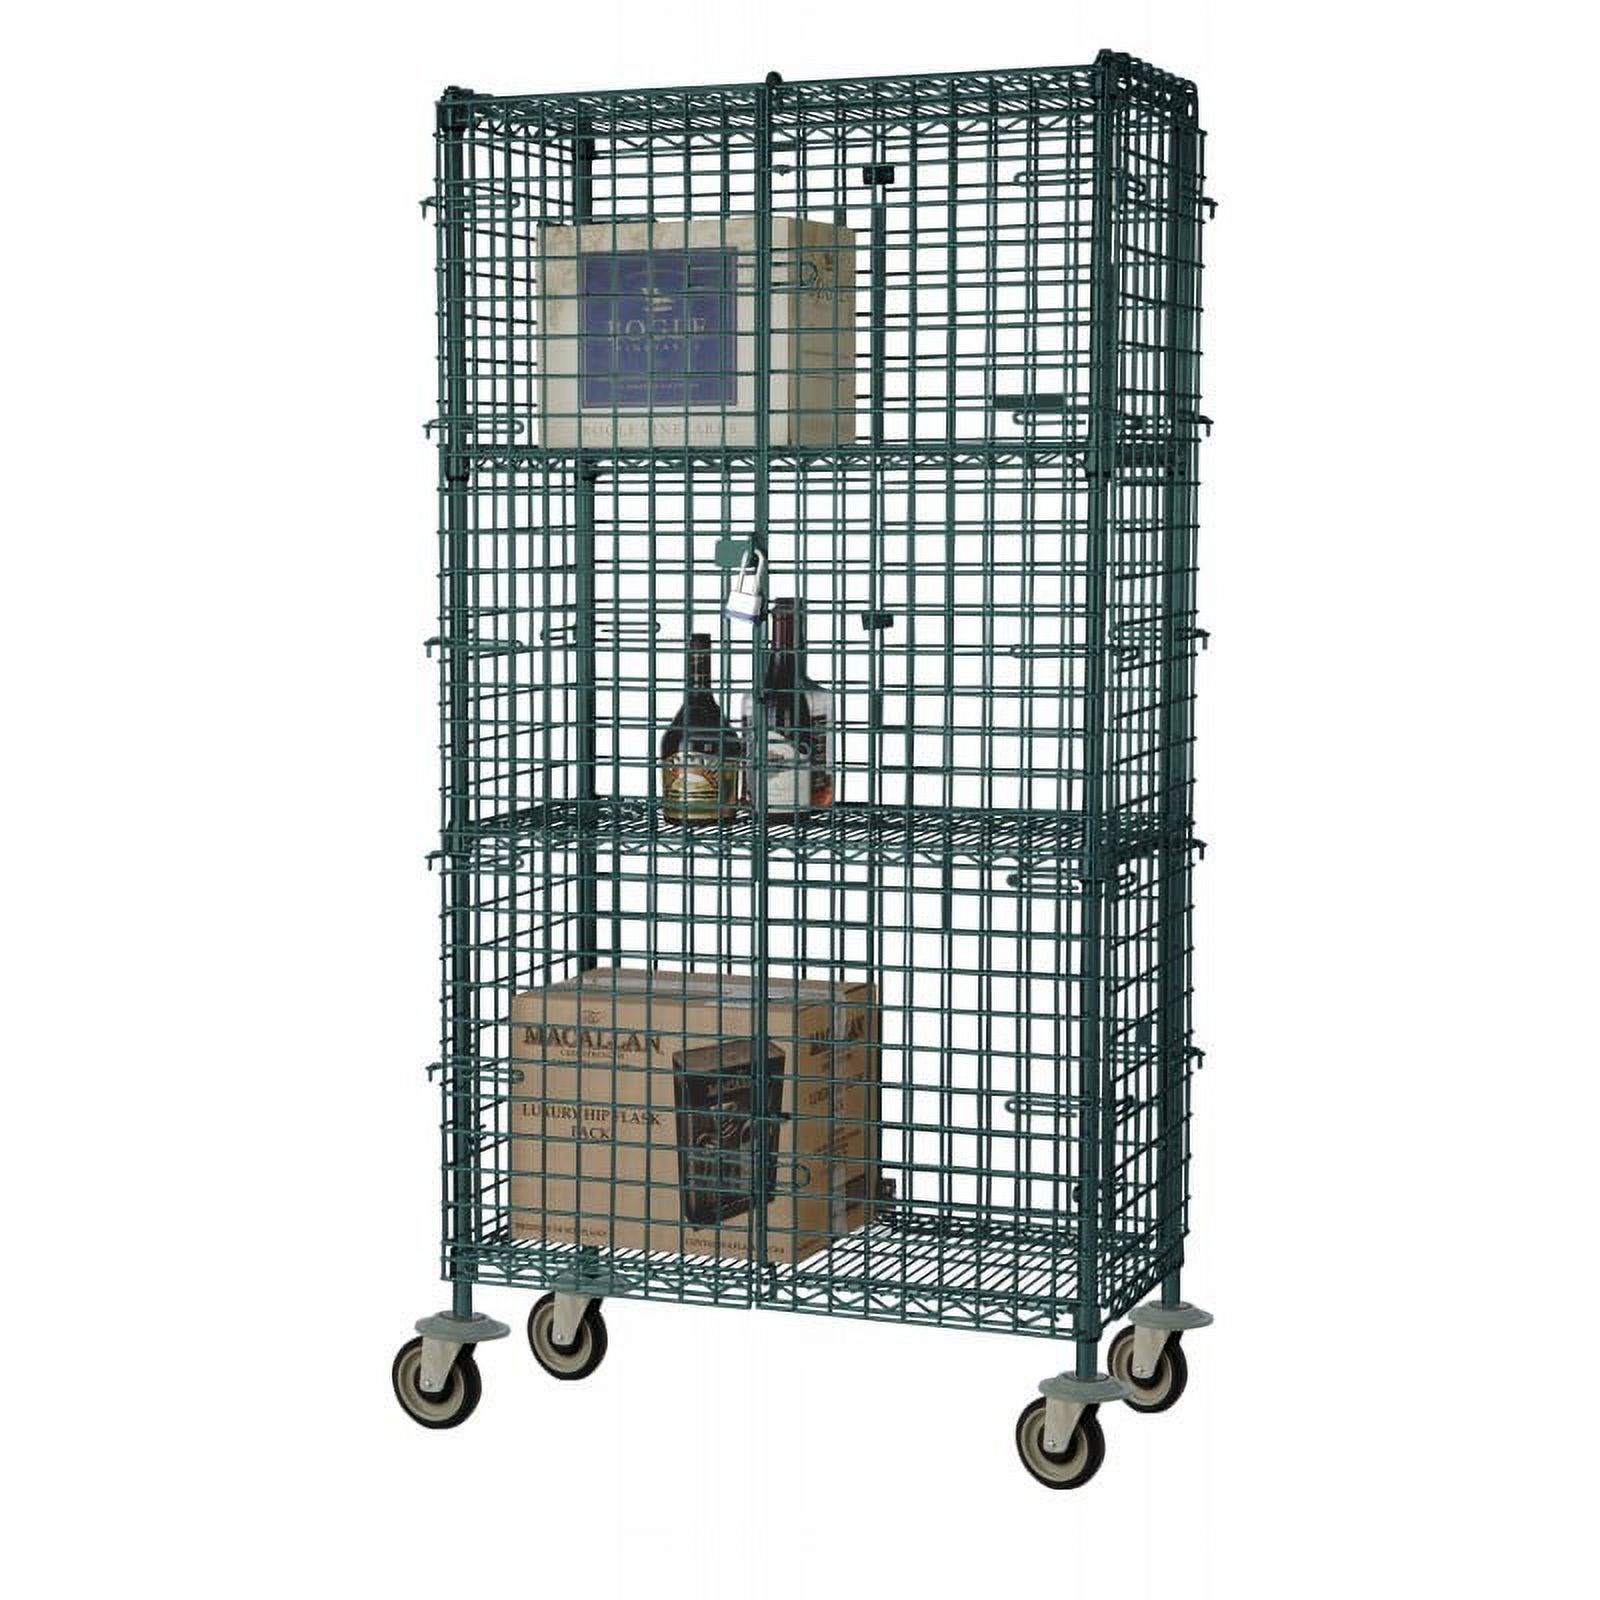 24" Deep x 60" Wide x 69" High Mobile Freezer Security Cage with 3 Interior Shelves - image 1 of 5